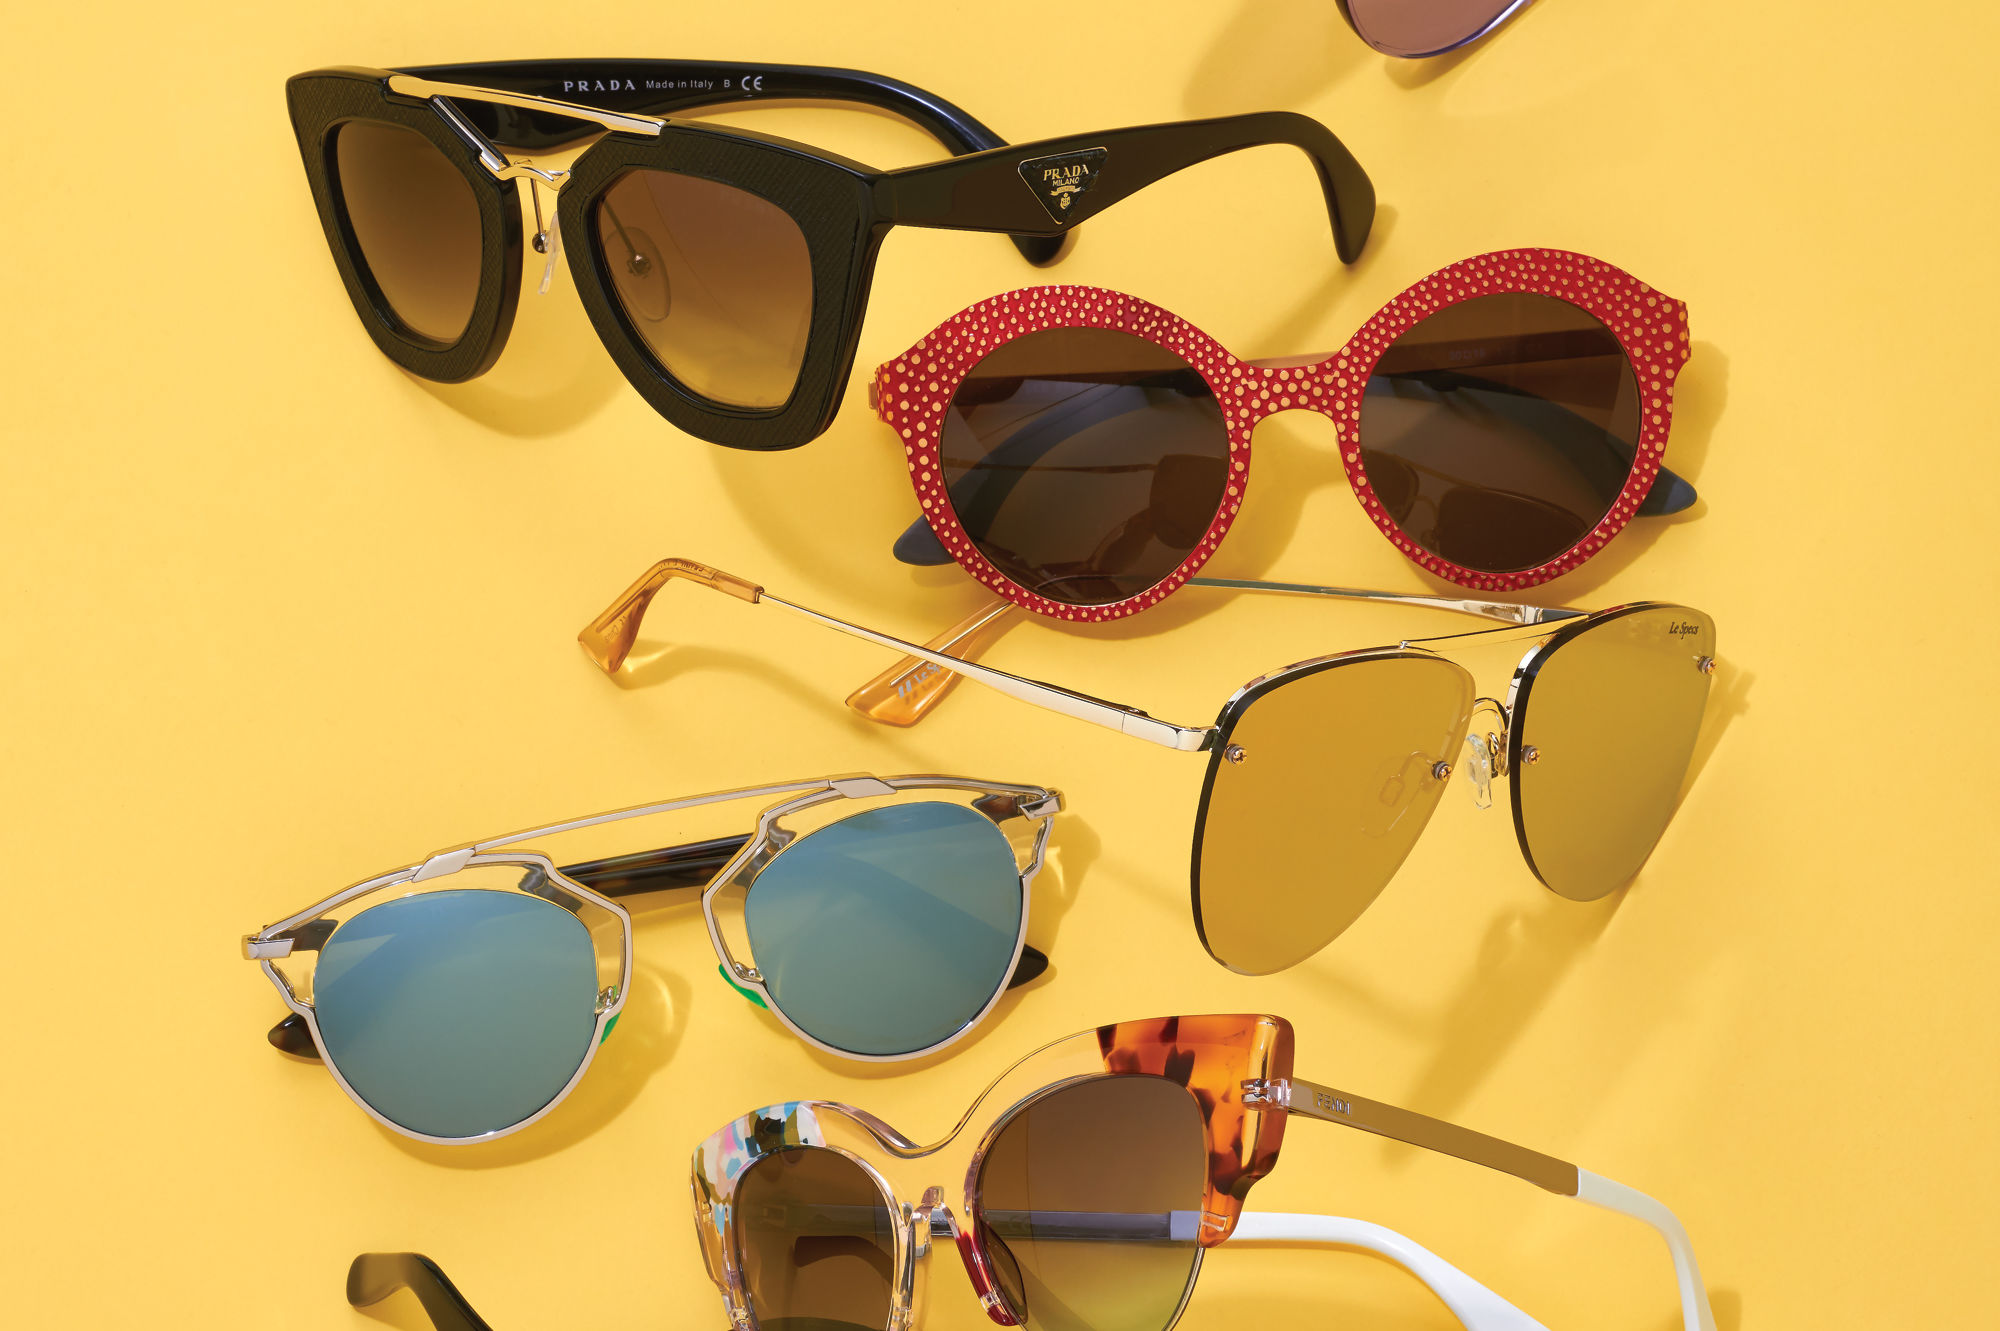 The Hottest Sunglasses for Your Seattle Summer | Seattle Met